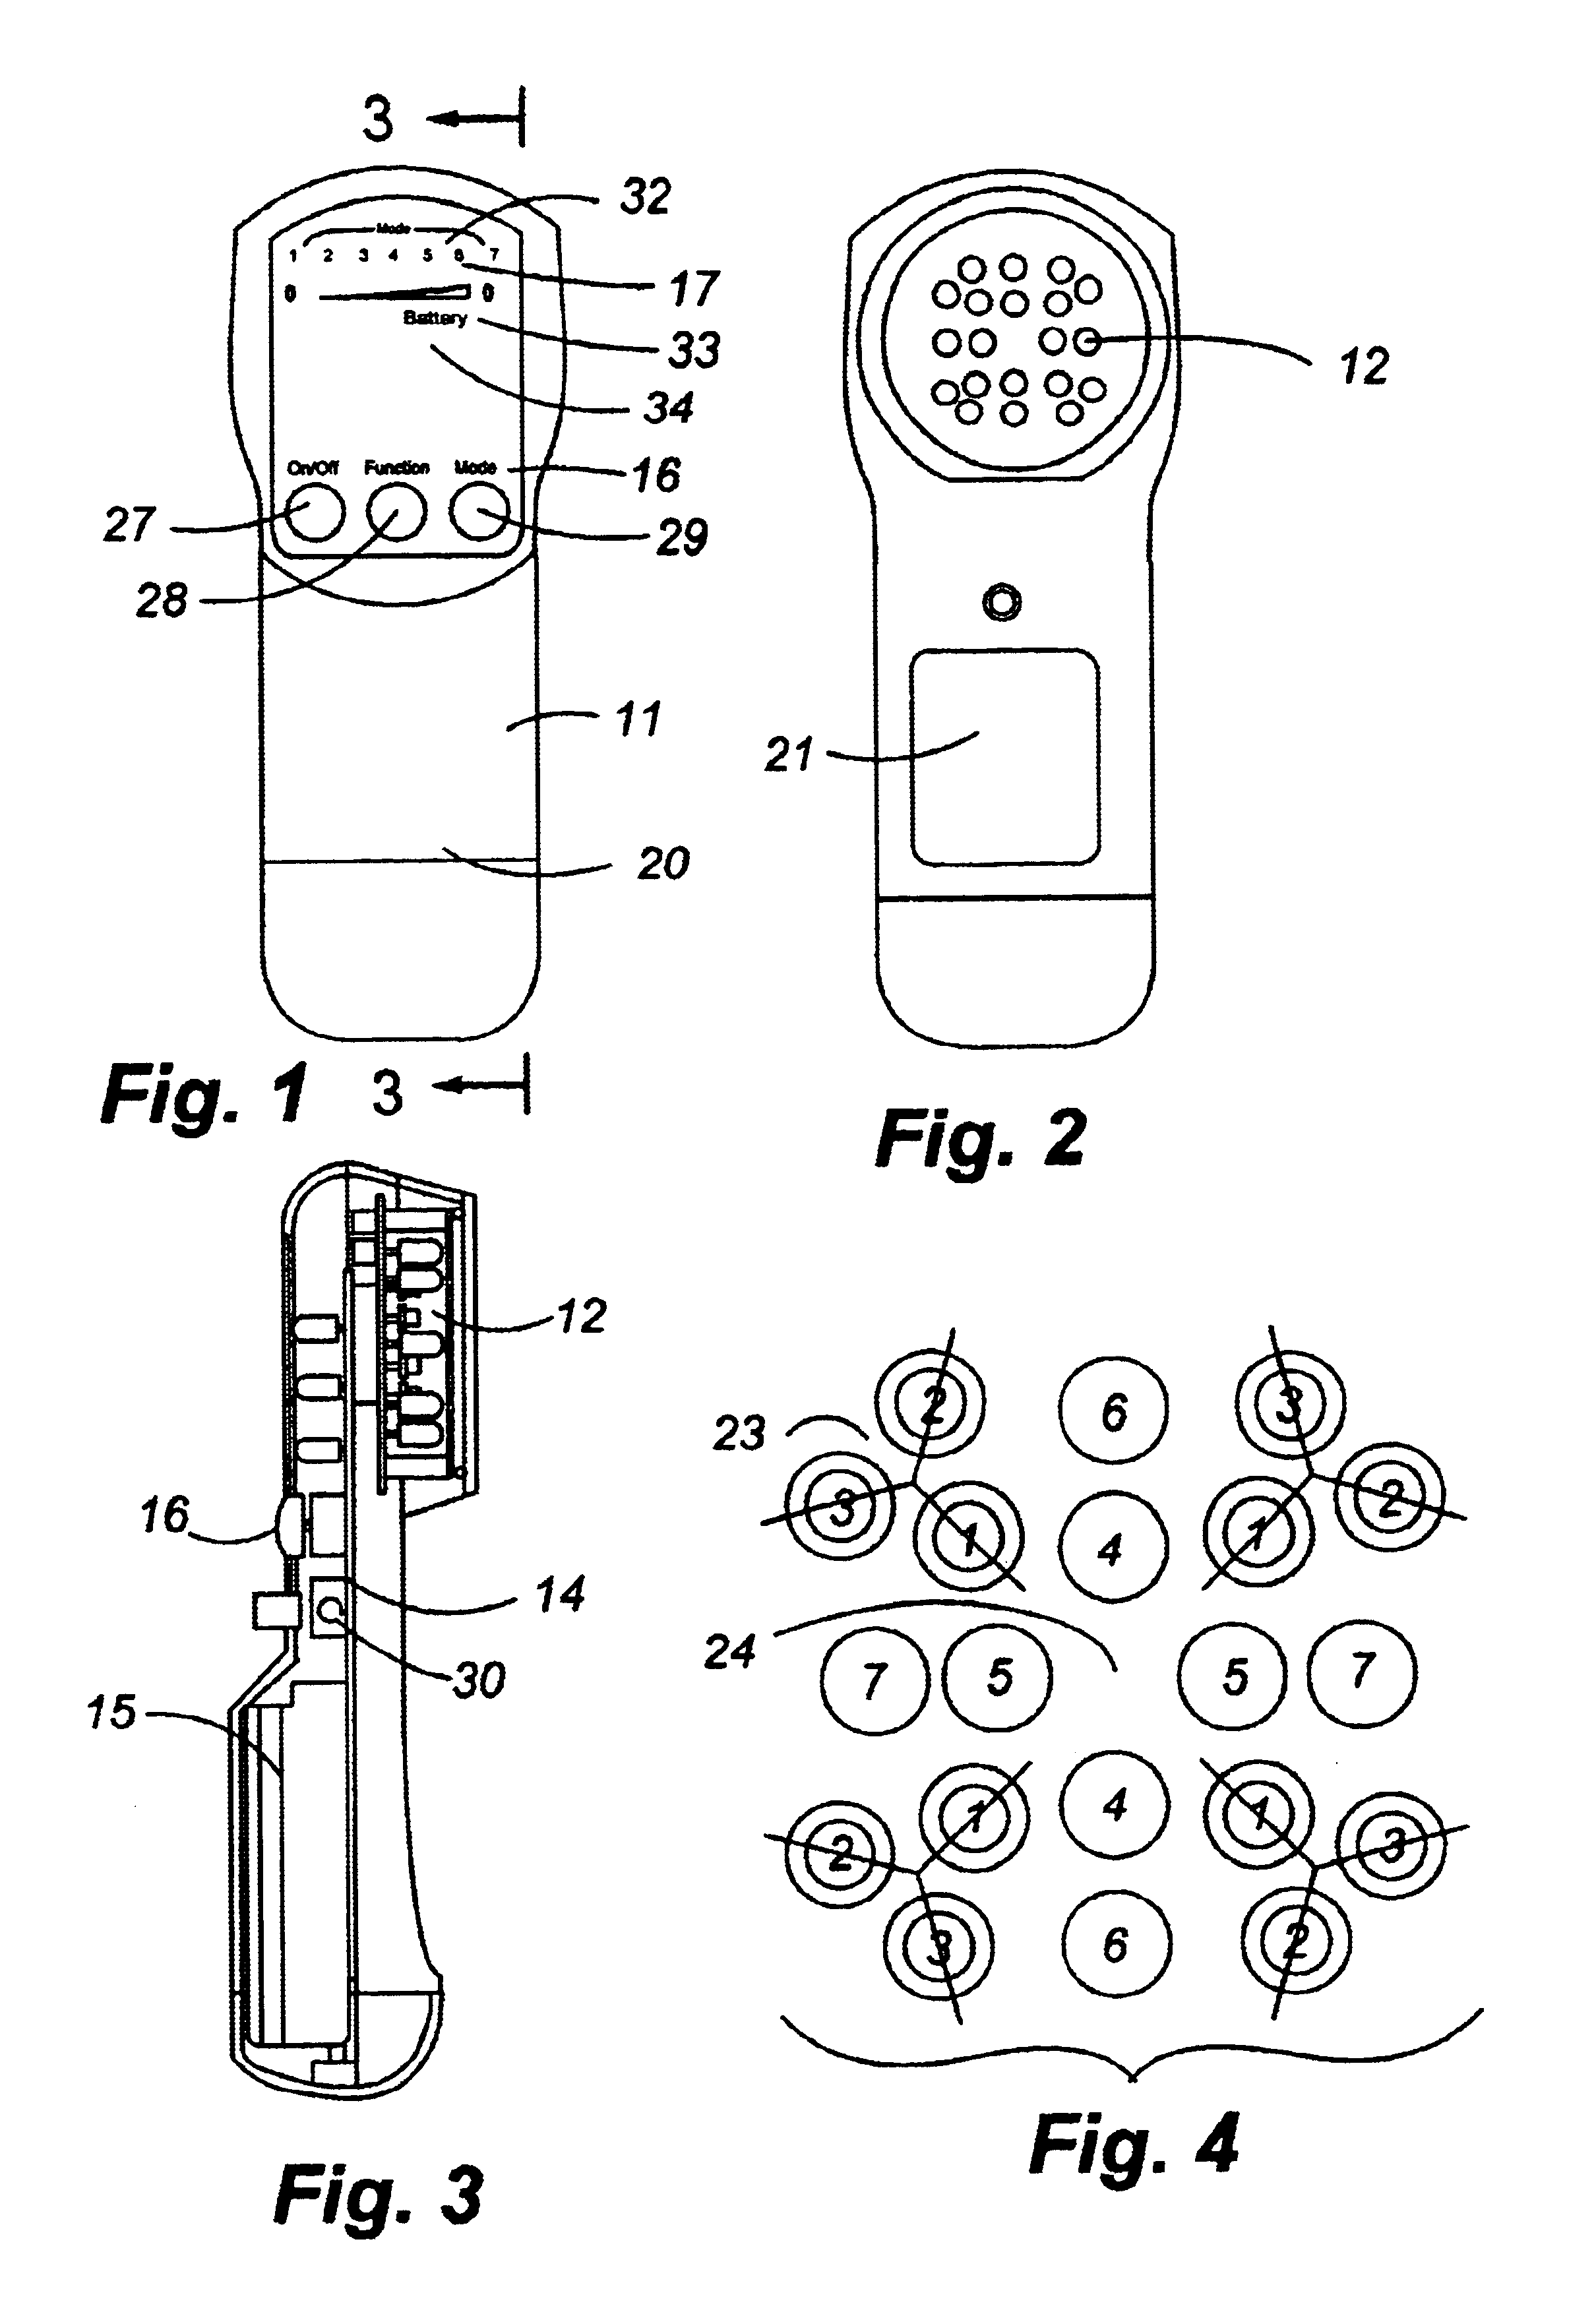 Therapeutic low level laser apparatus and method